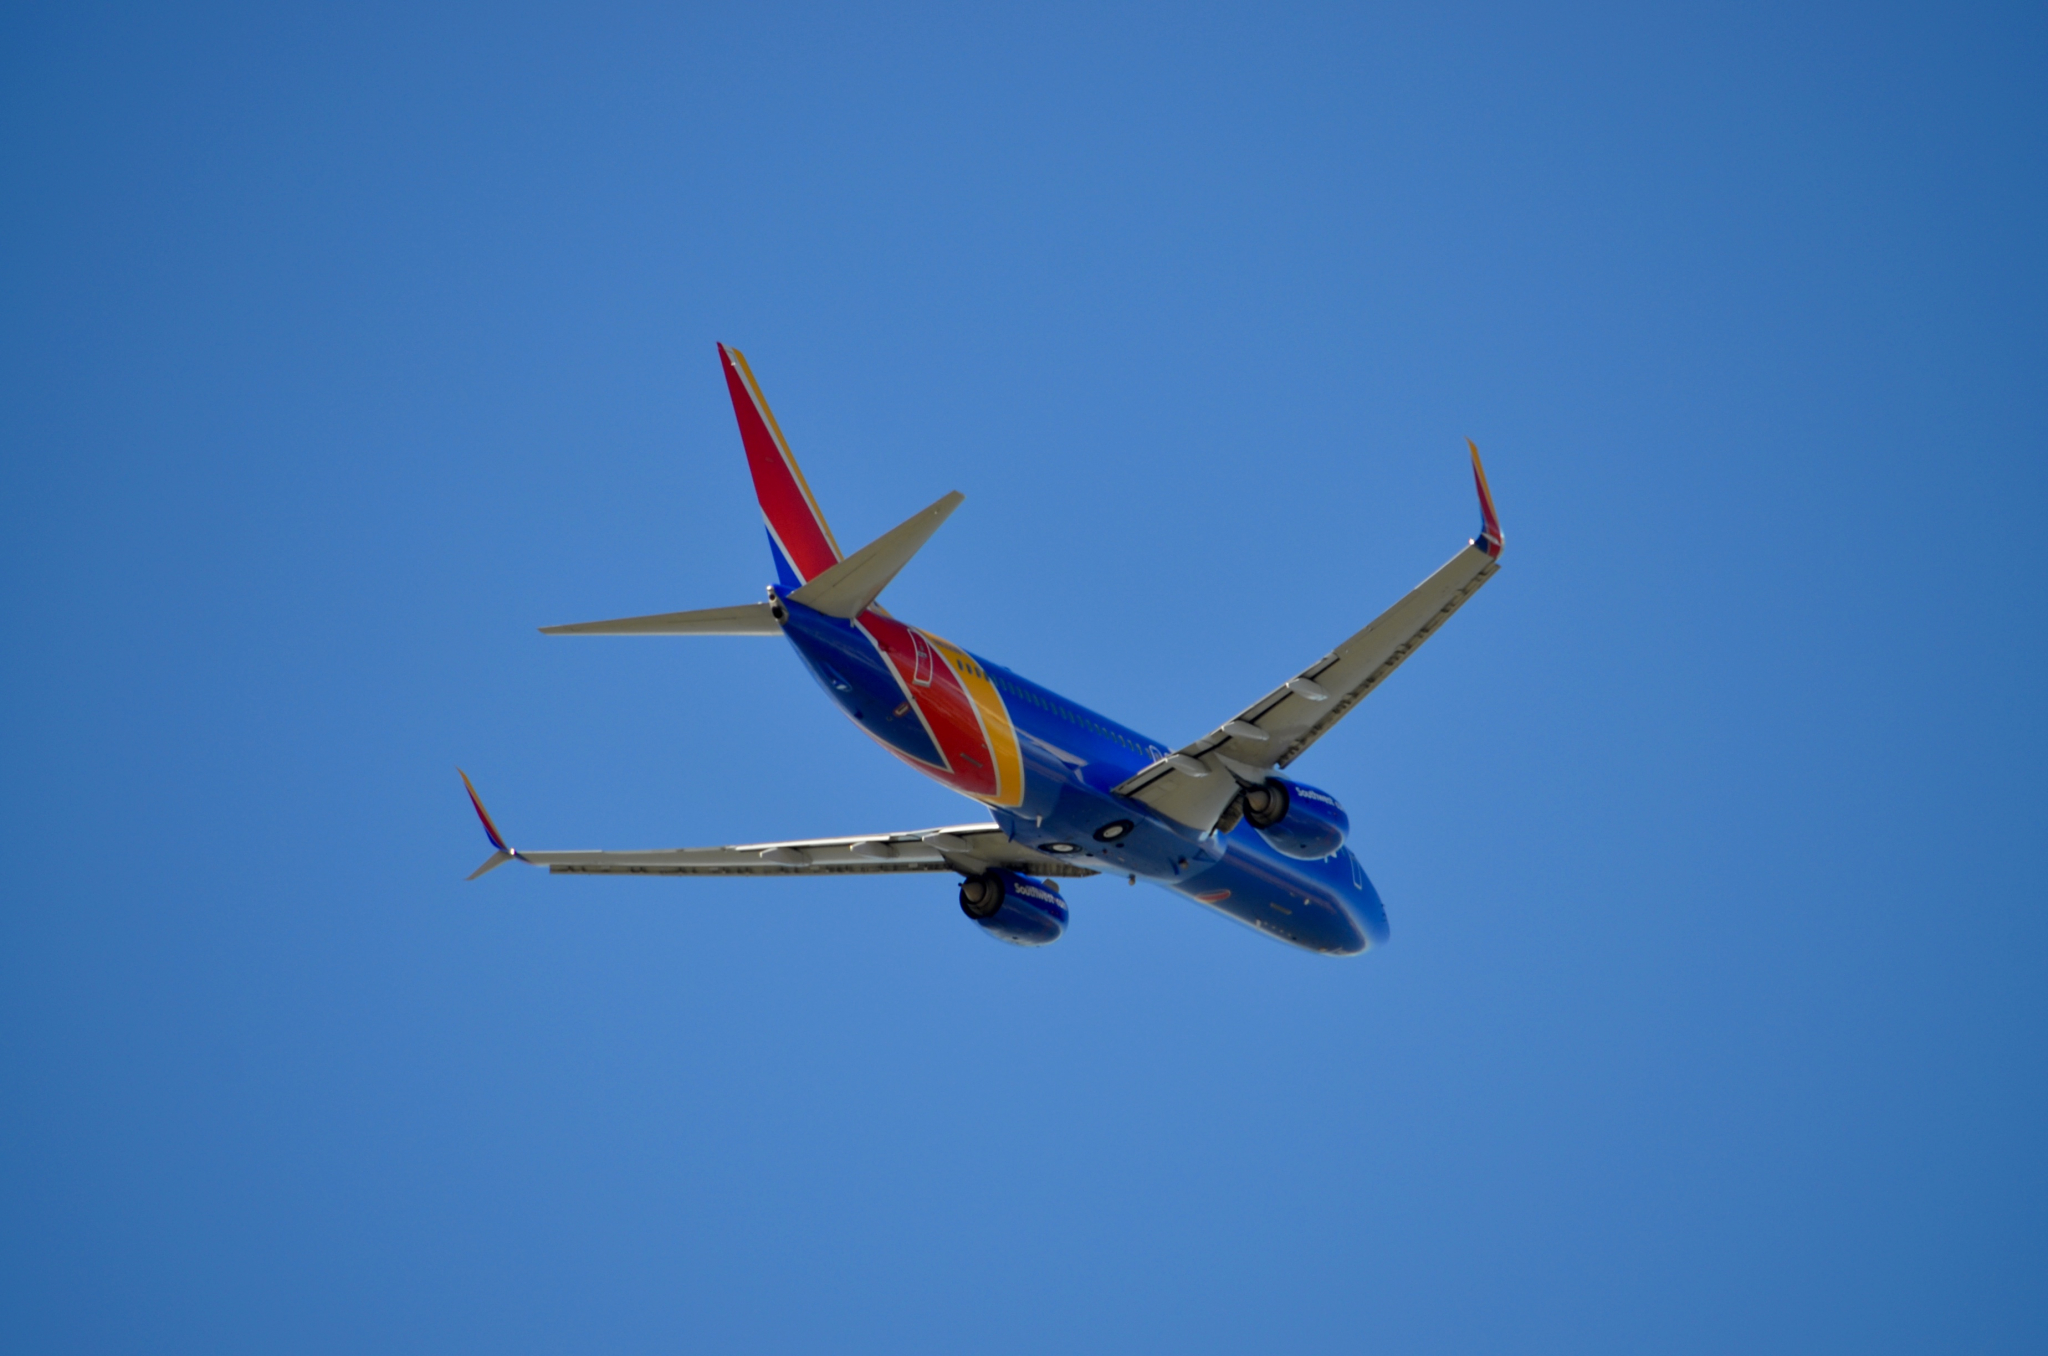 southwest airlines hawaii announcement